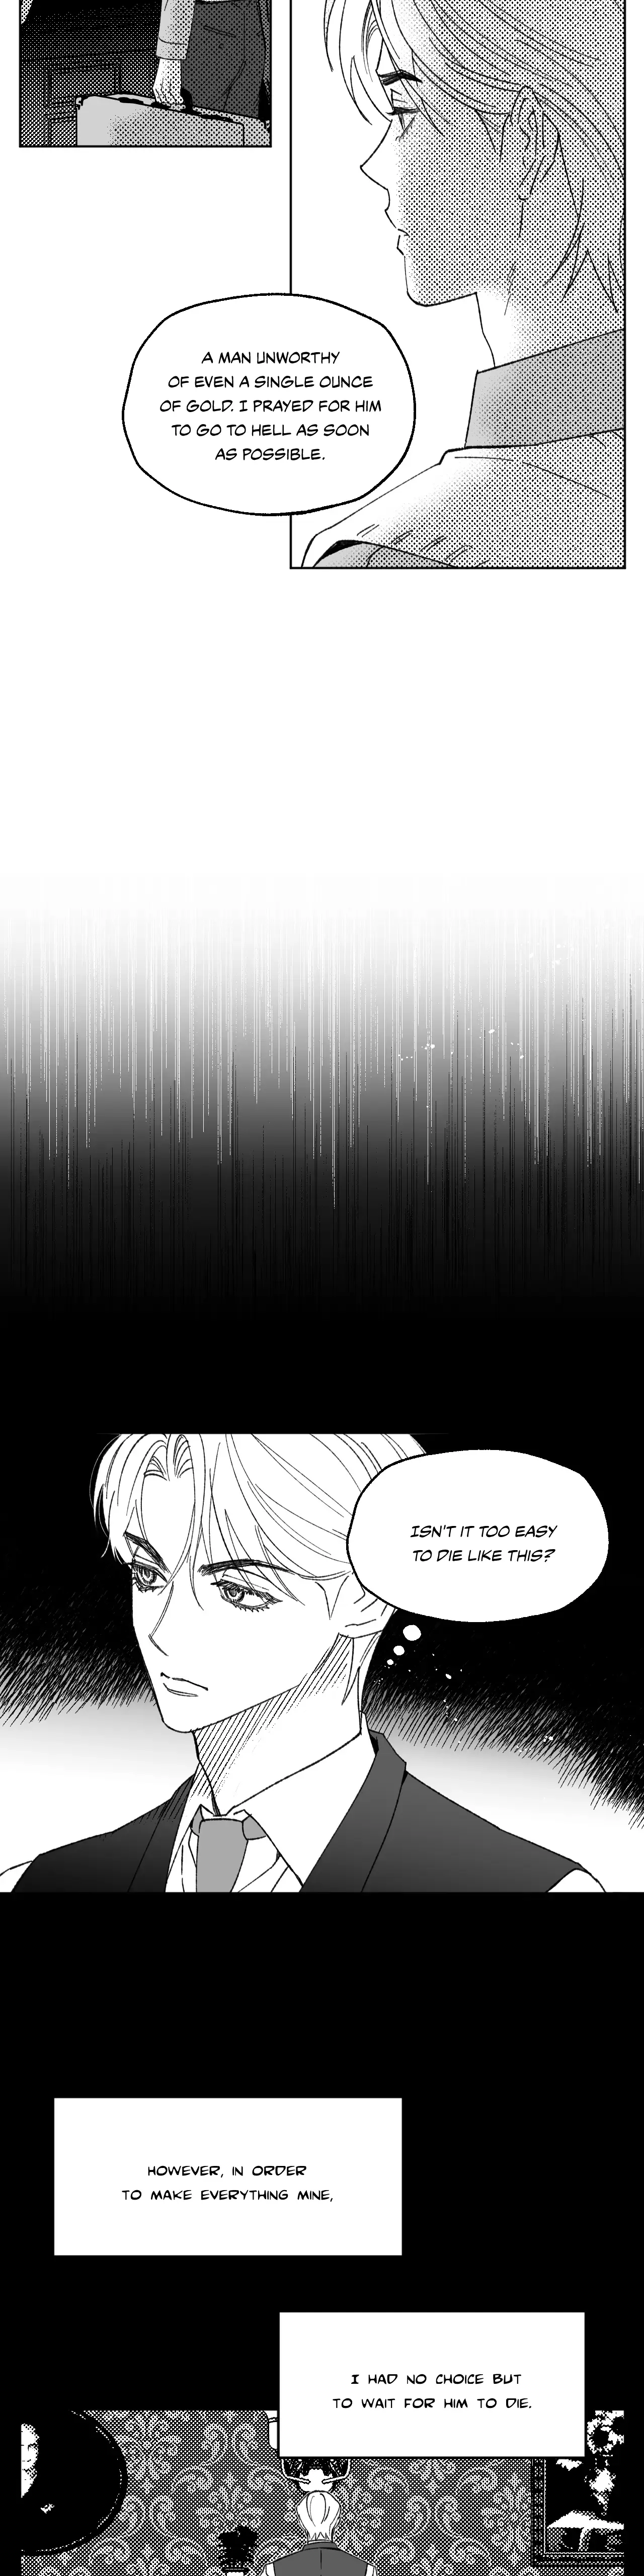 [Hardcore Bl Anthology] Esther's Garden - Page 4